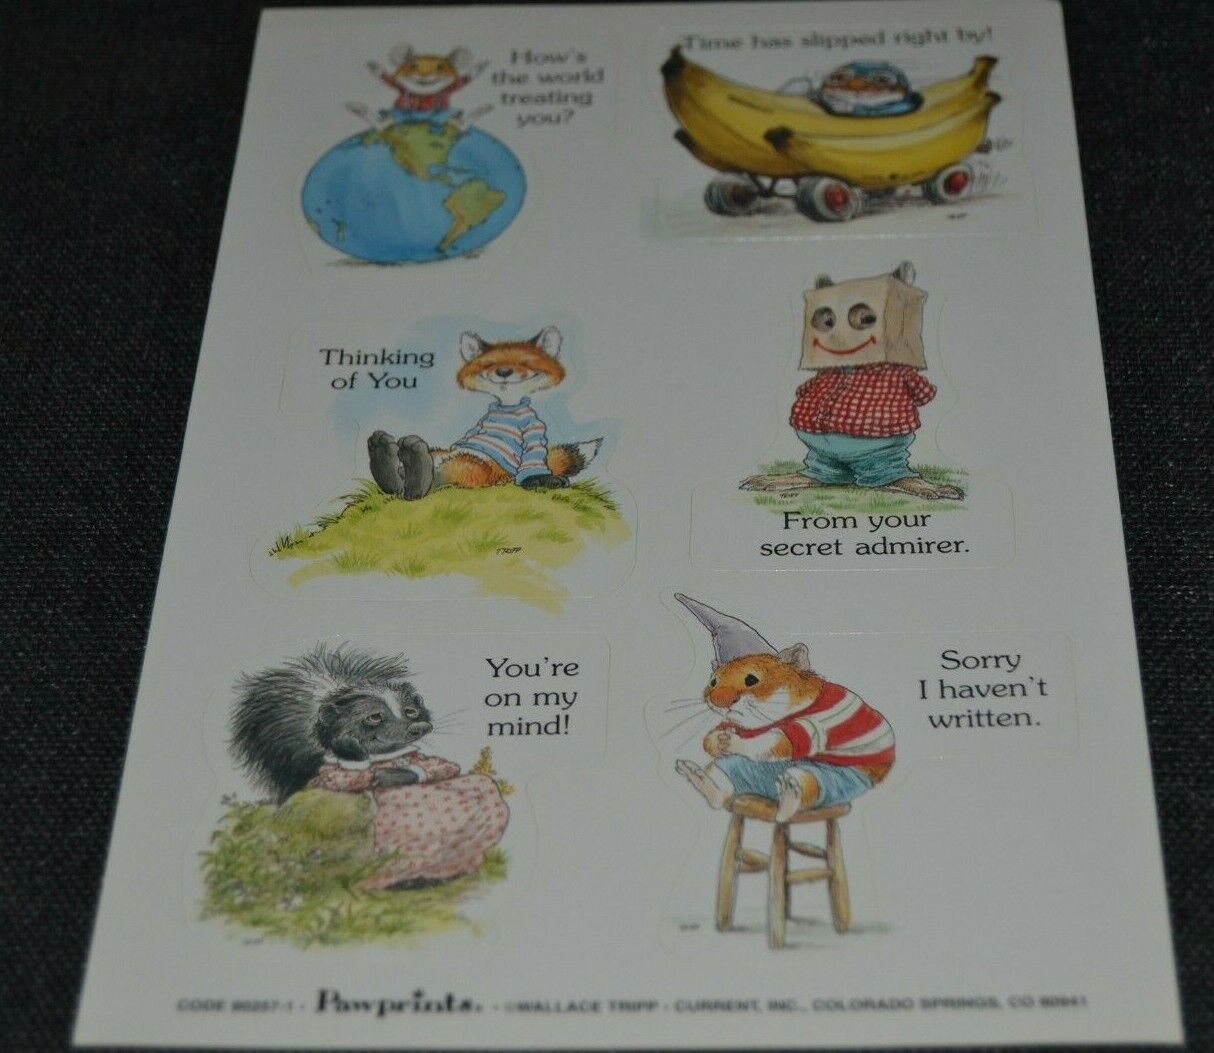 Stickers 1 Sheet Pawprints Wallace Tripp Current, Inc. Fox Skunk Mouse Vintage